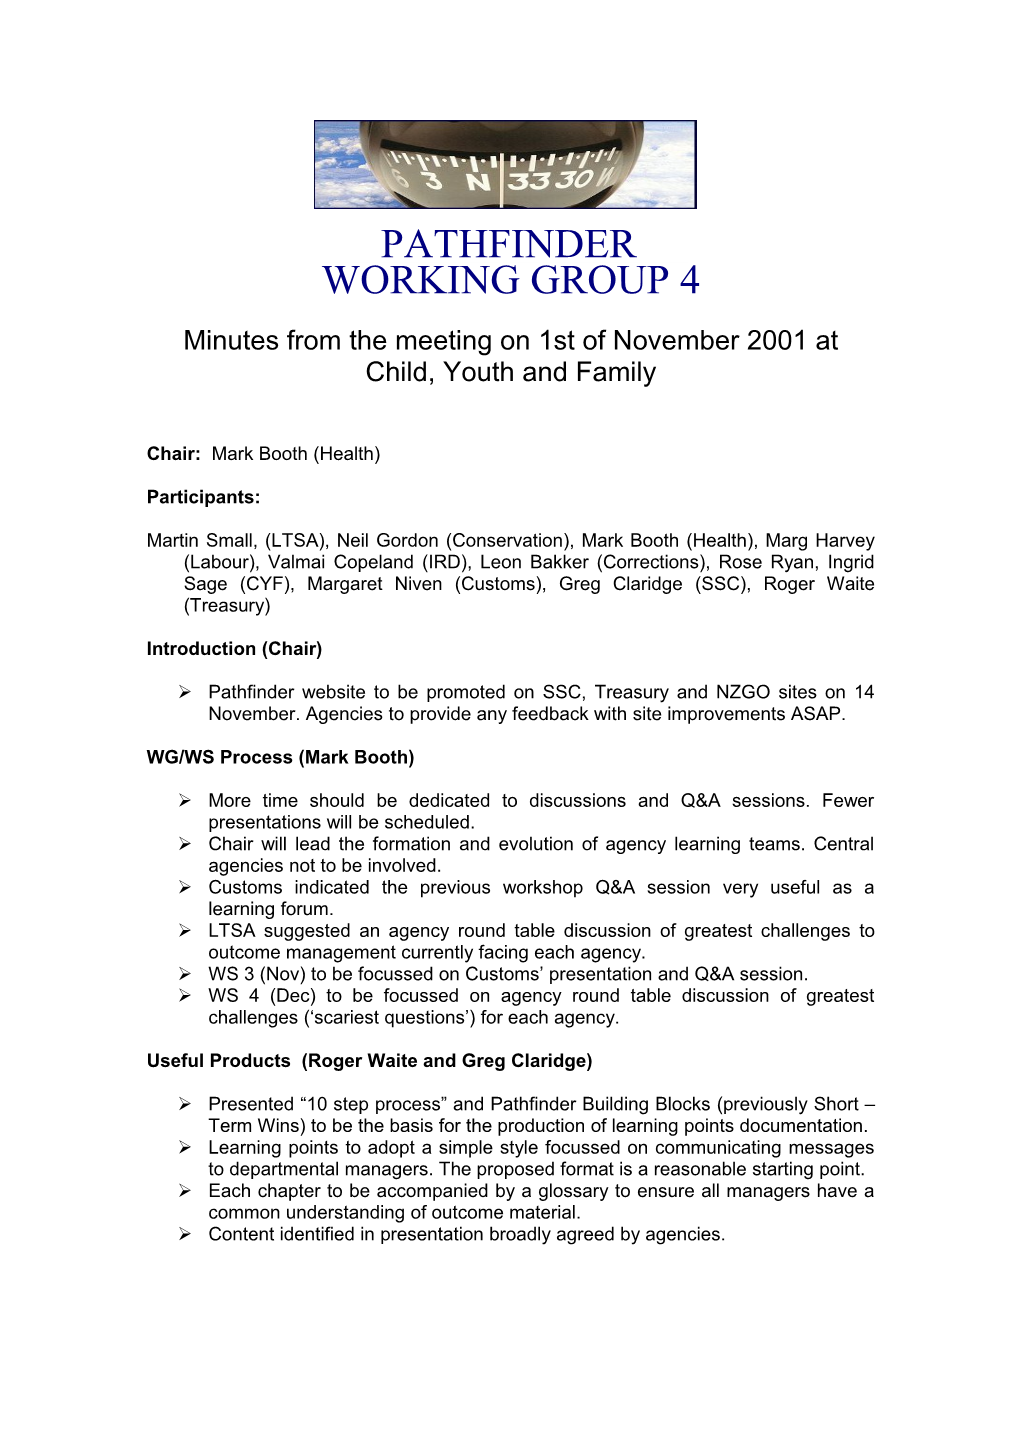 Minutes from the Meeting on 1St of November 2001 at Child, Youth and Family